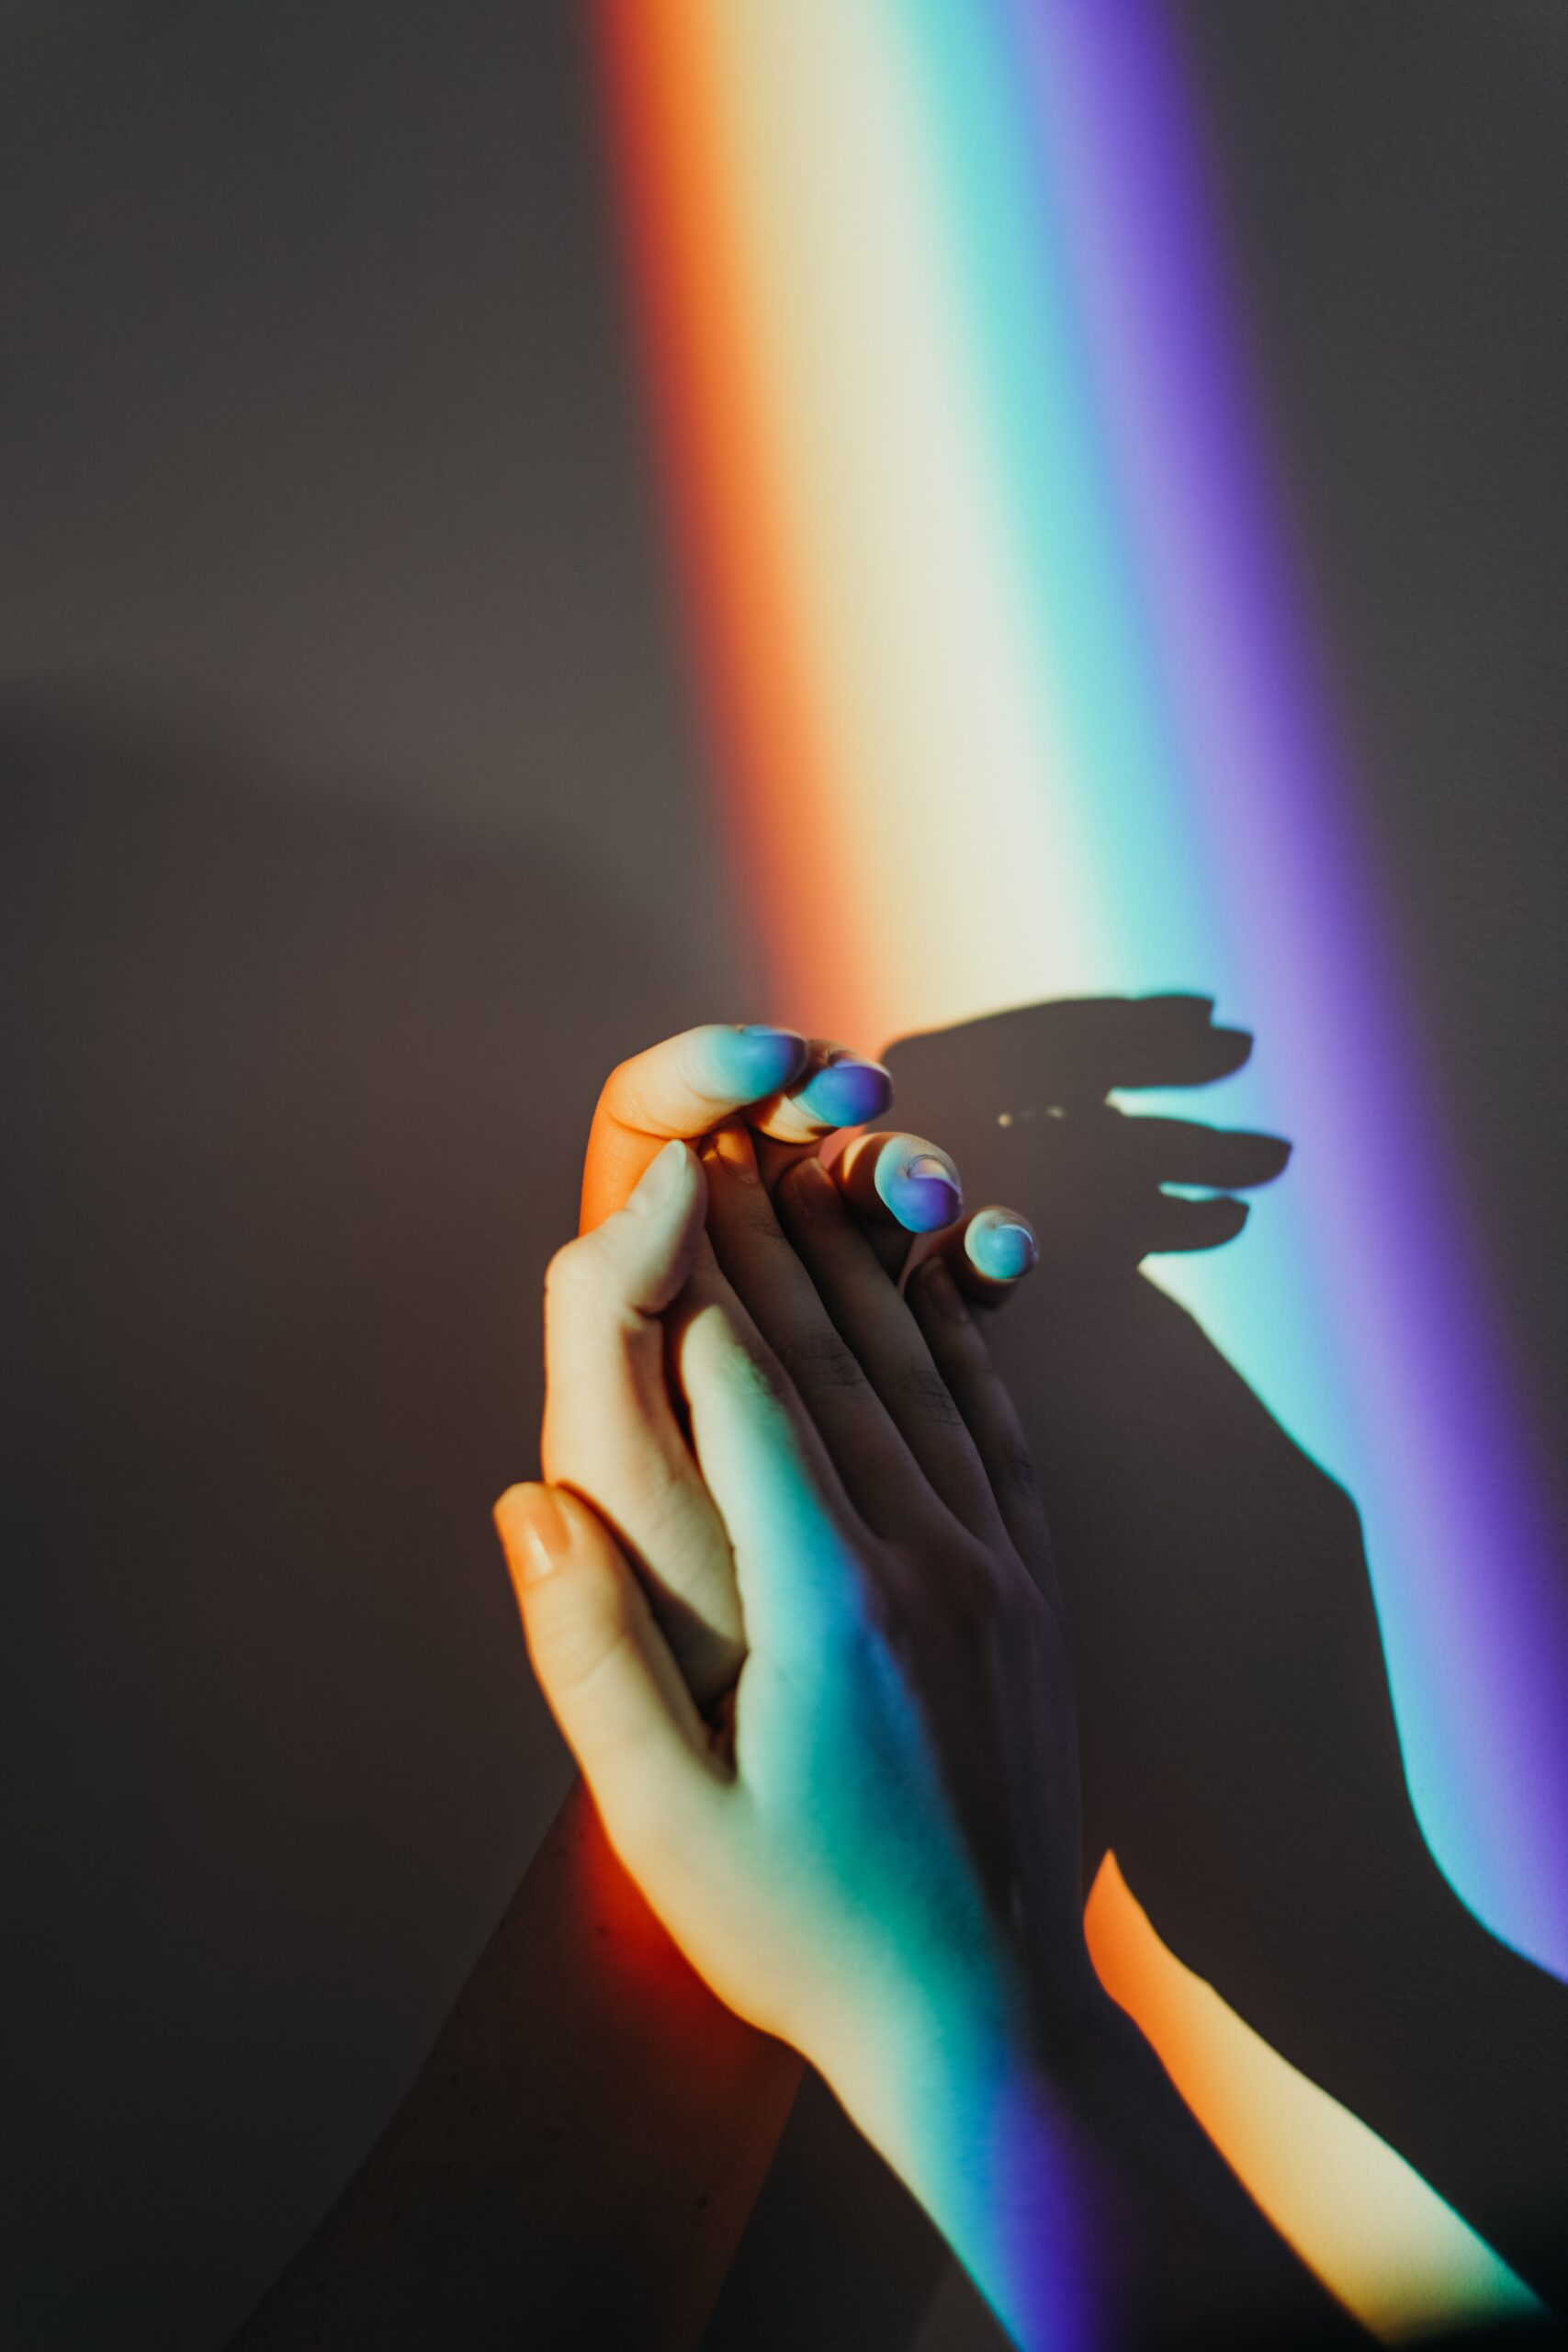 Two hands meet, palm-to-palm. Rainbow light cascades over the hands.